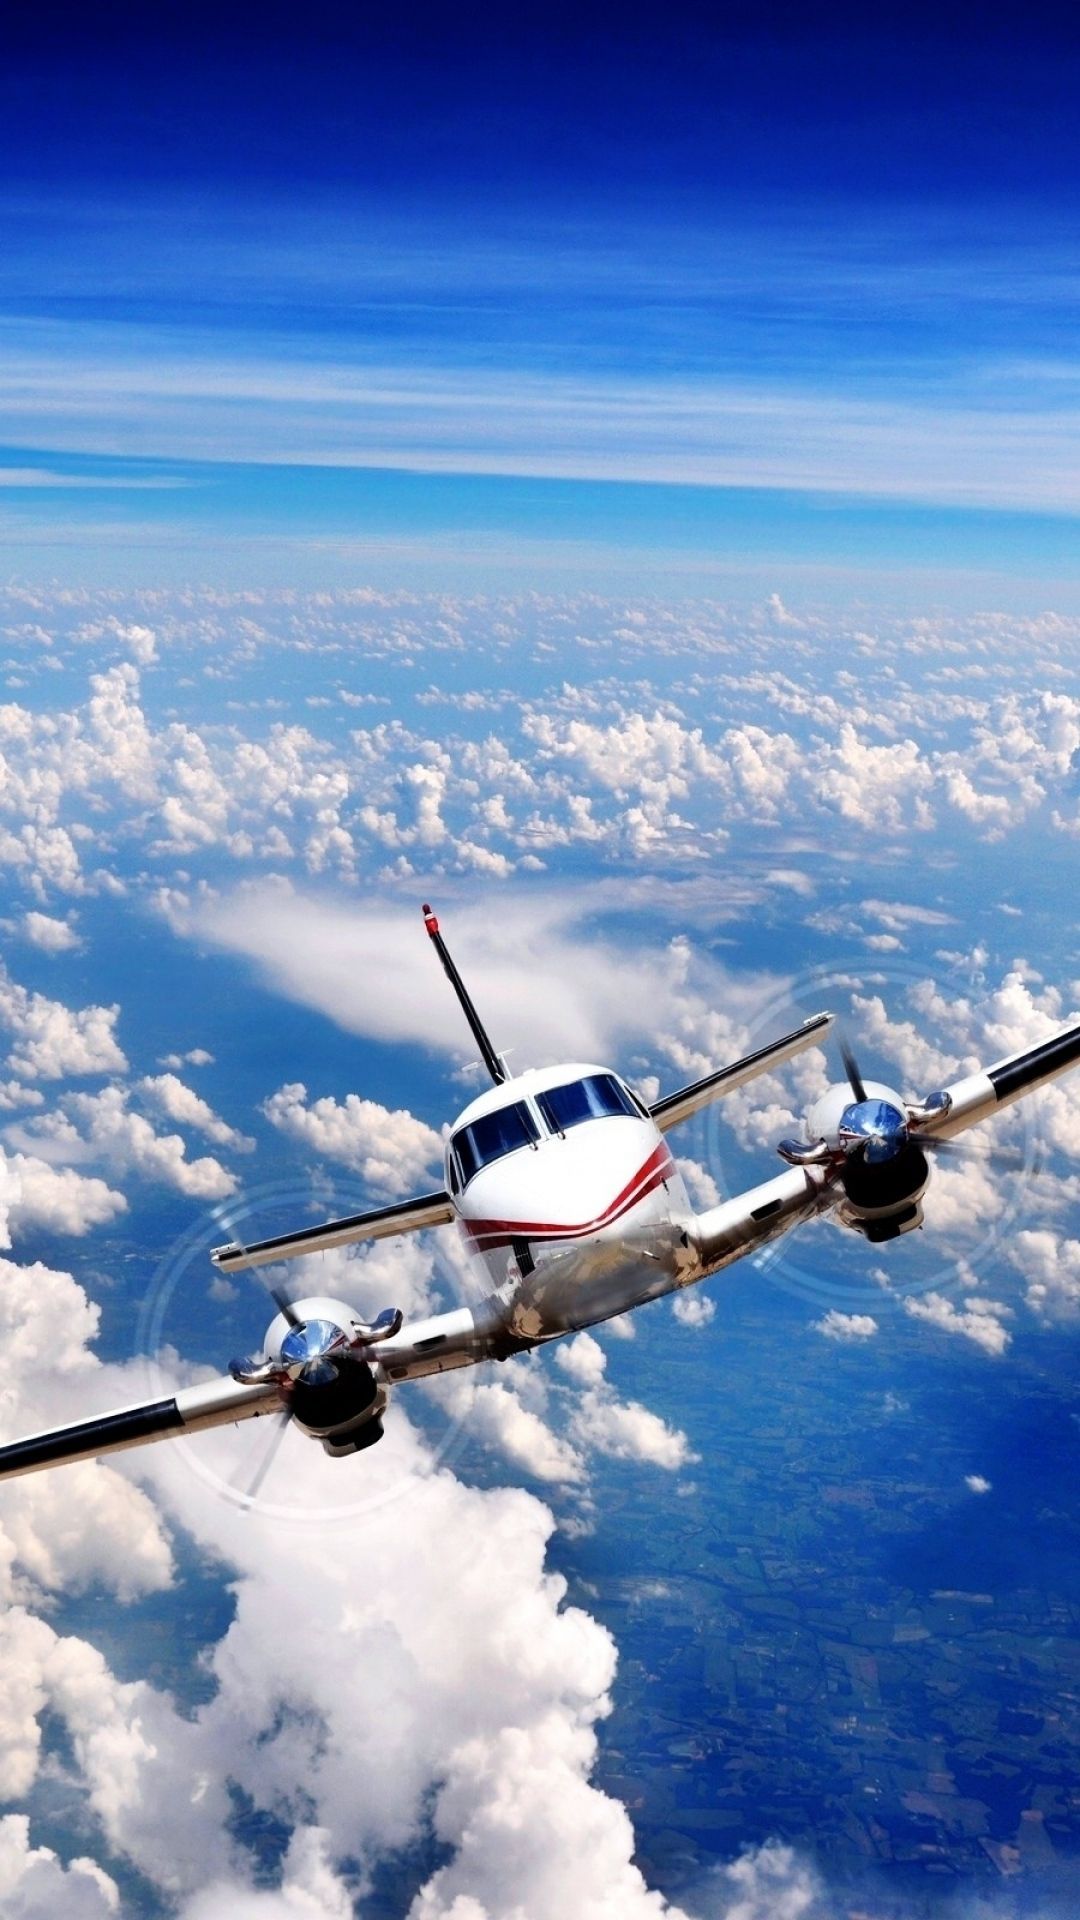 Plane Wallpaper Android Apps on Google Play. Plane wallpaper, HD background, Plane